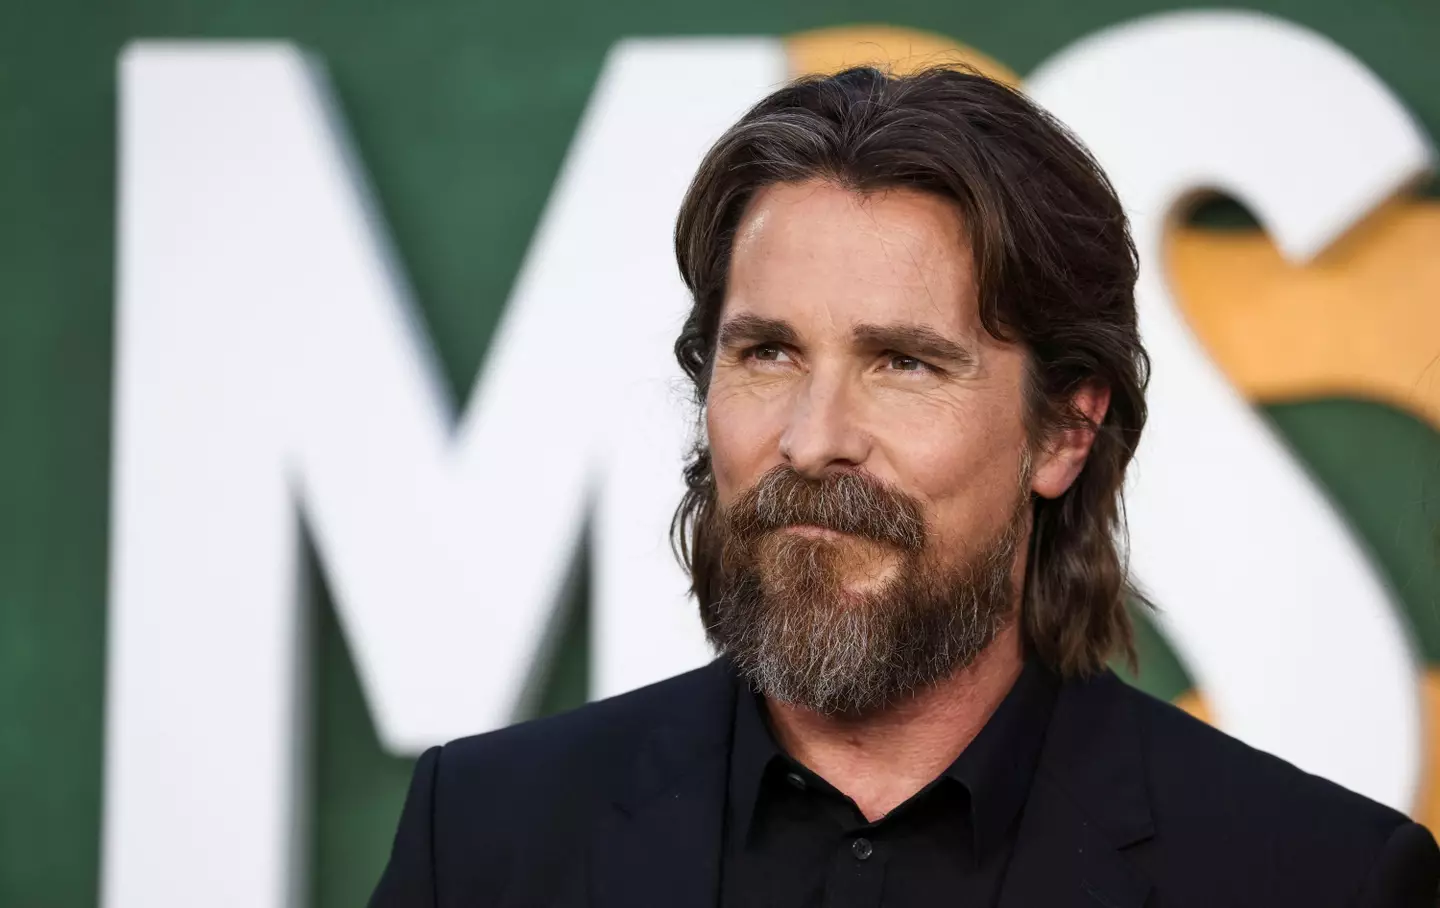 Christian Bale has been praised for drastically changing his appearance in his movie roles.